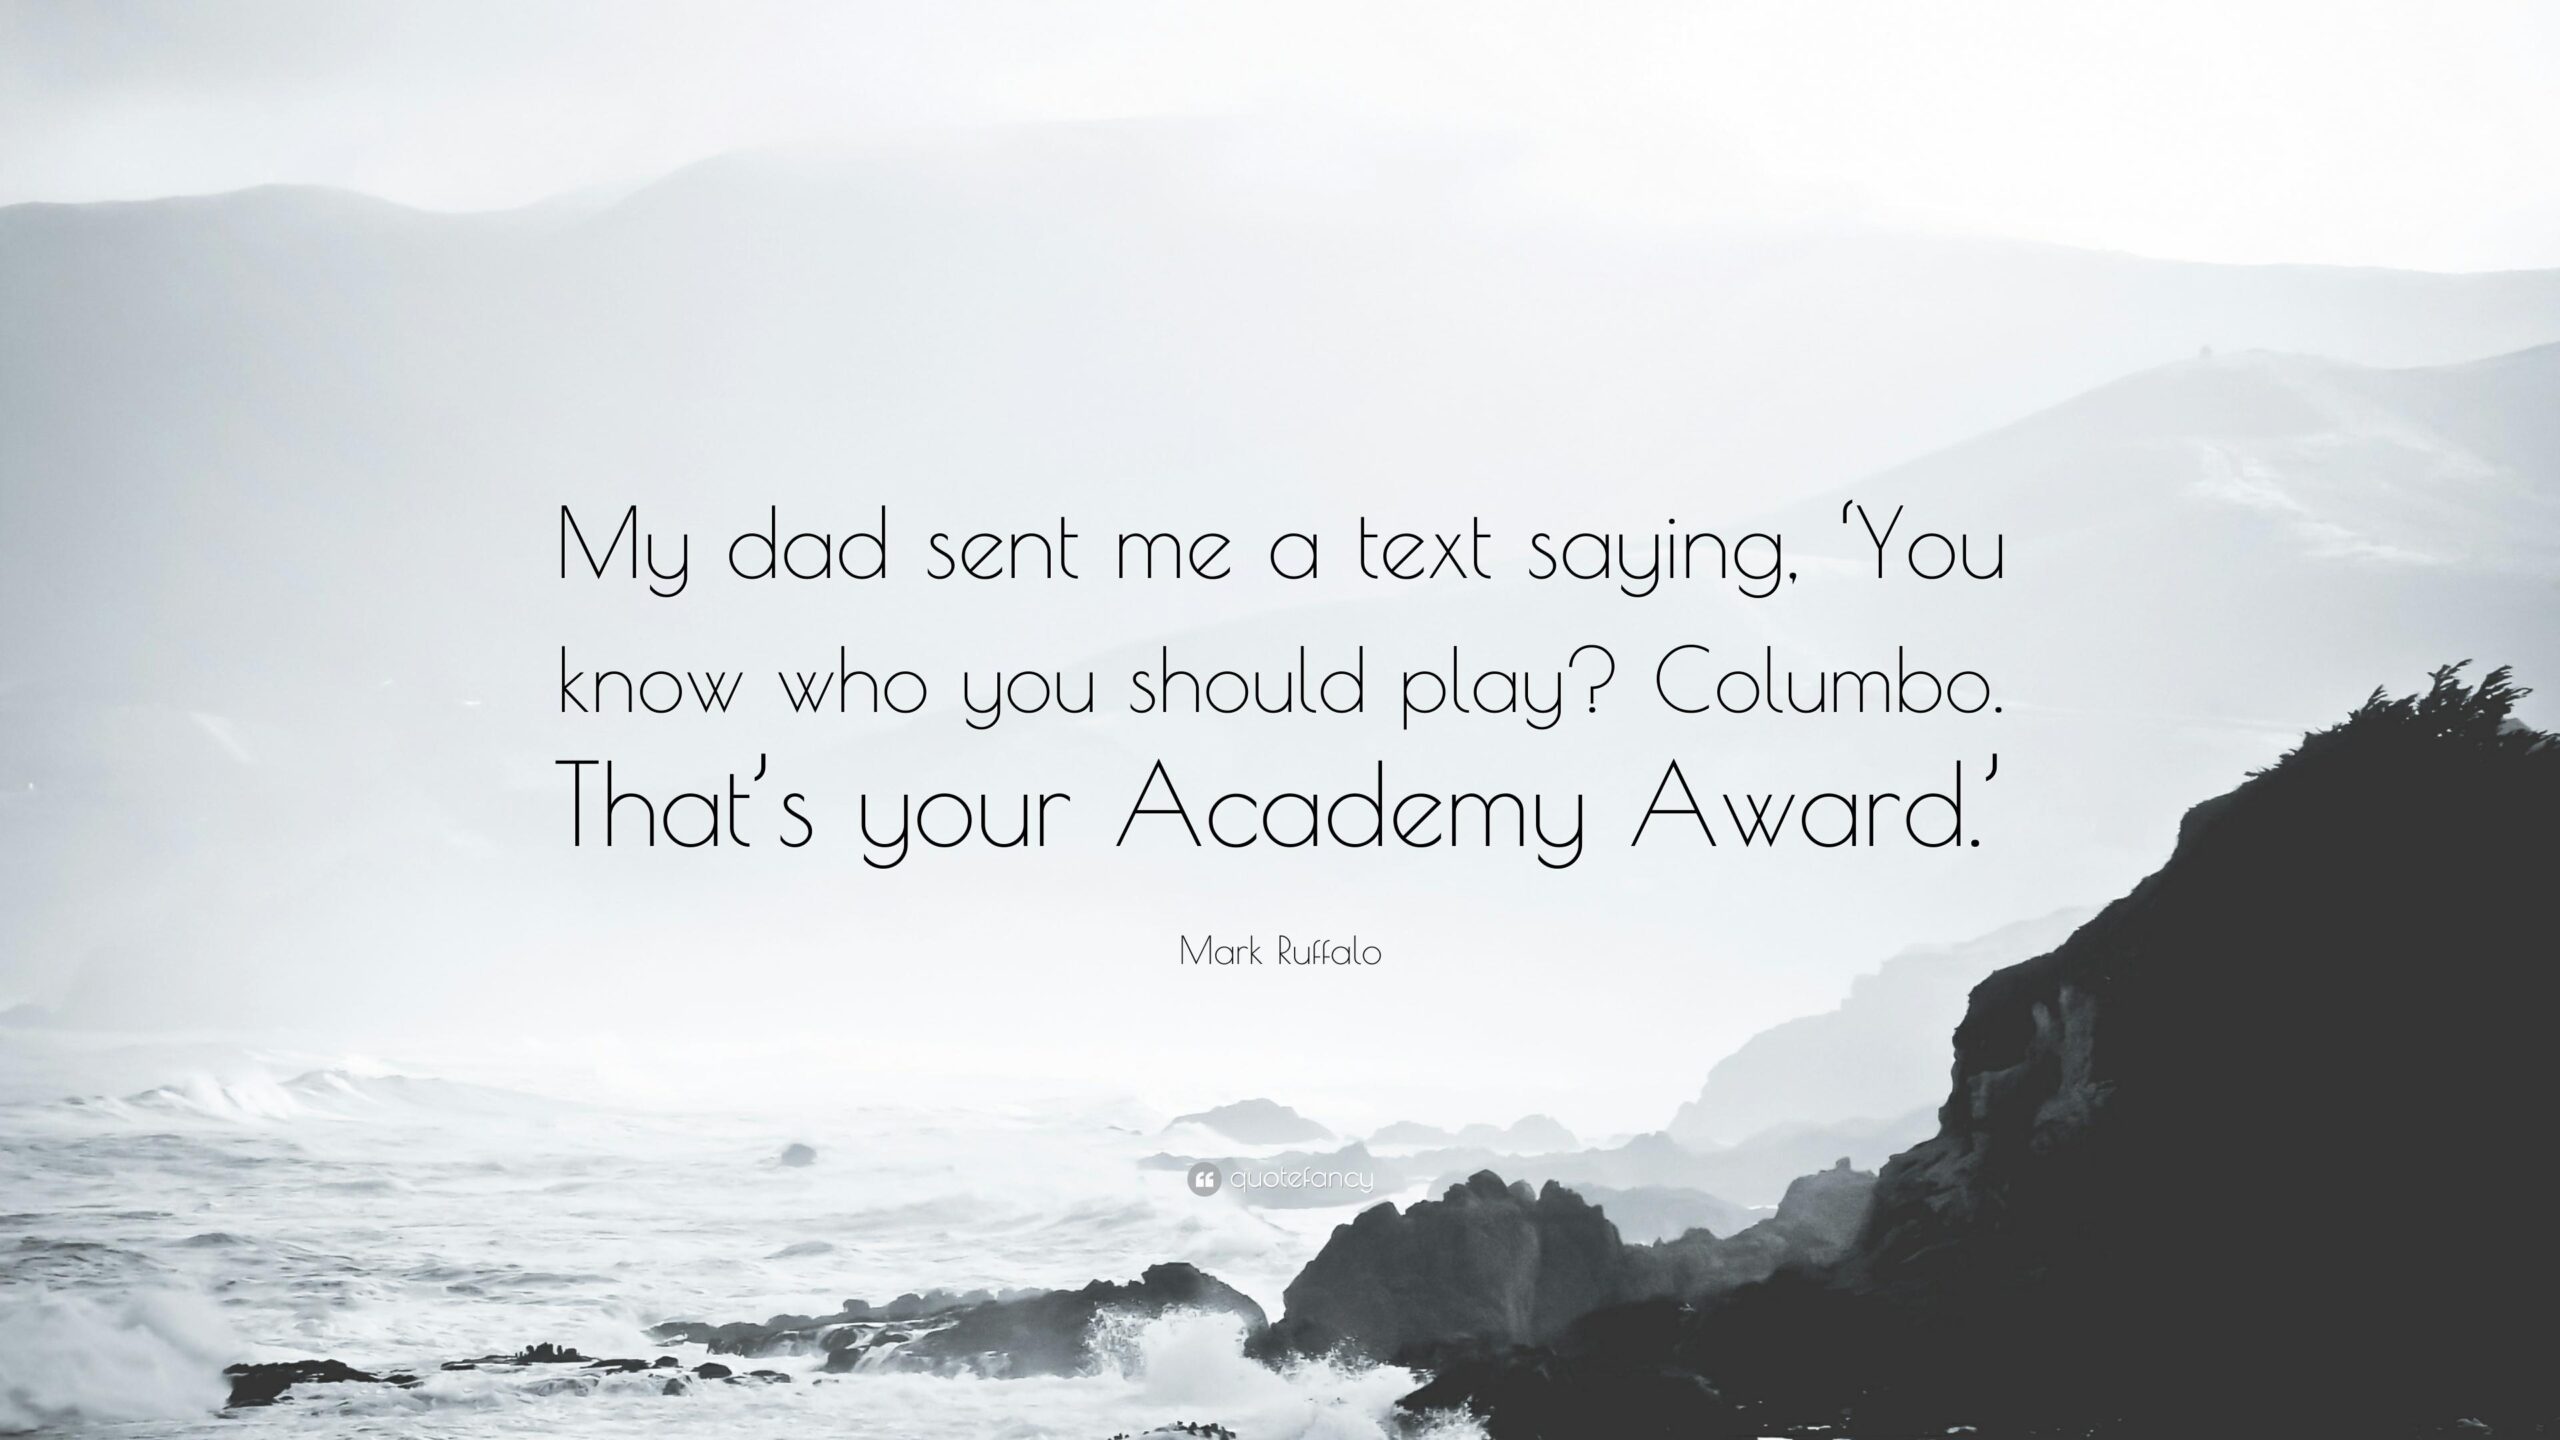 Mark Ruffalo Quote “My dad sent me a text saying, ‘You know who you